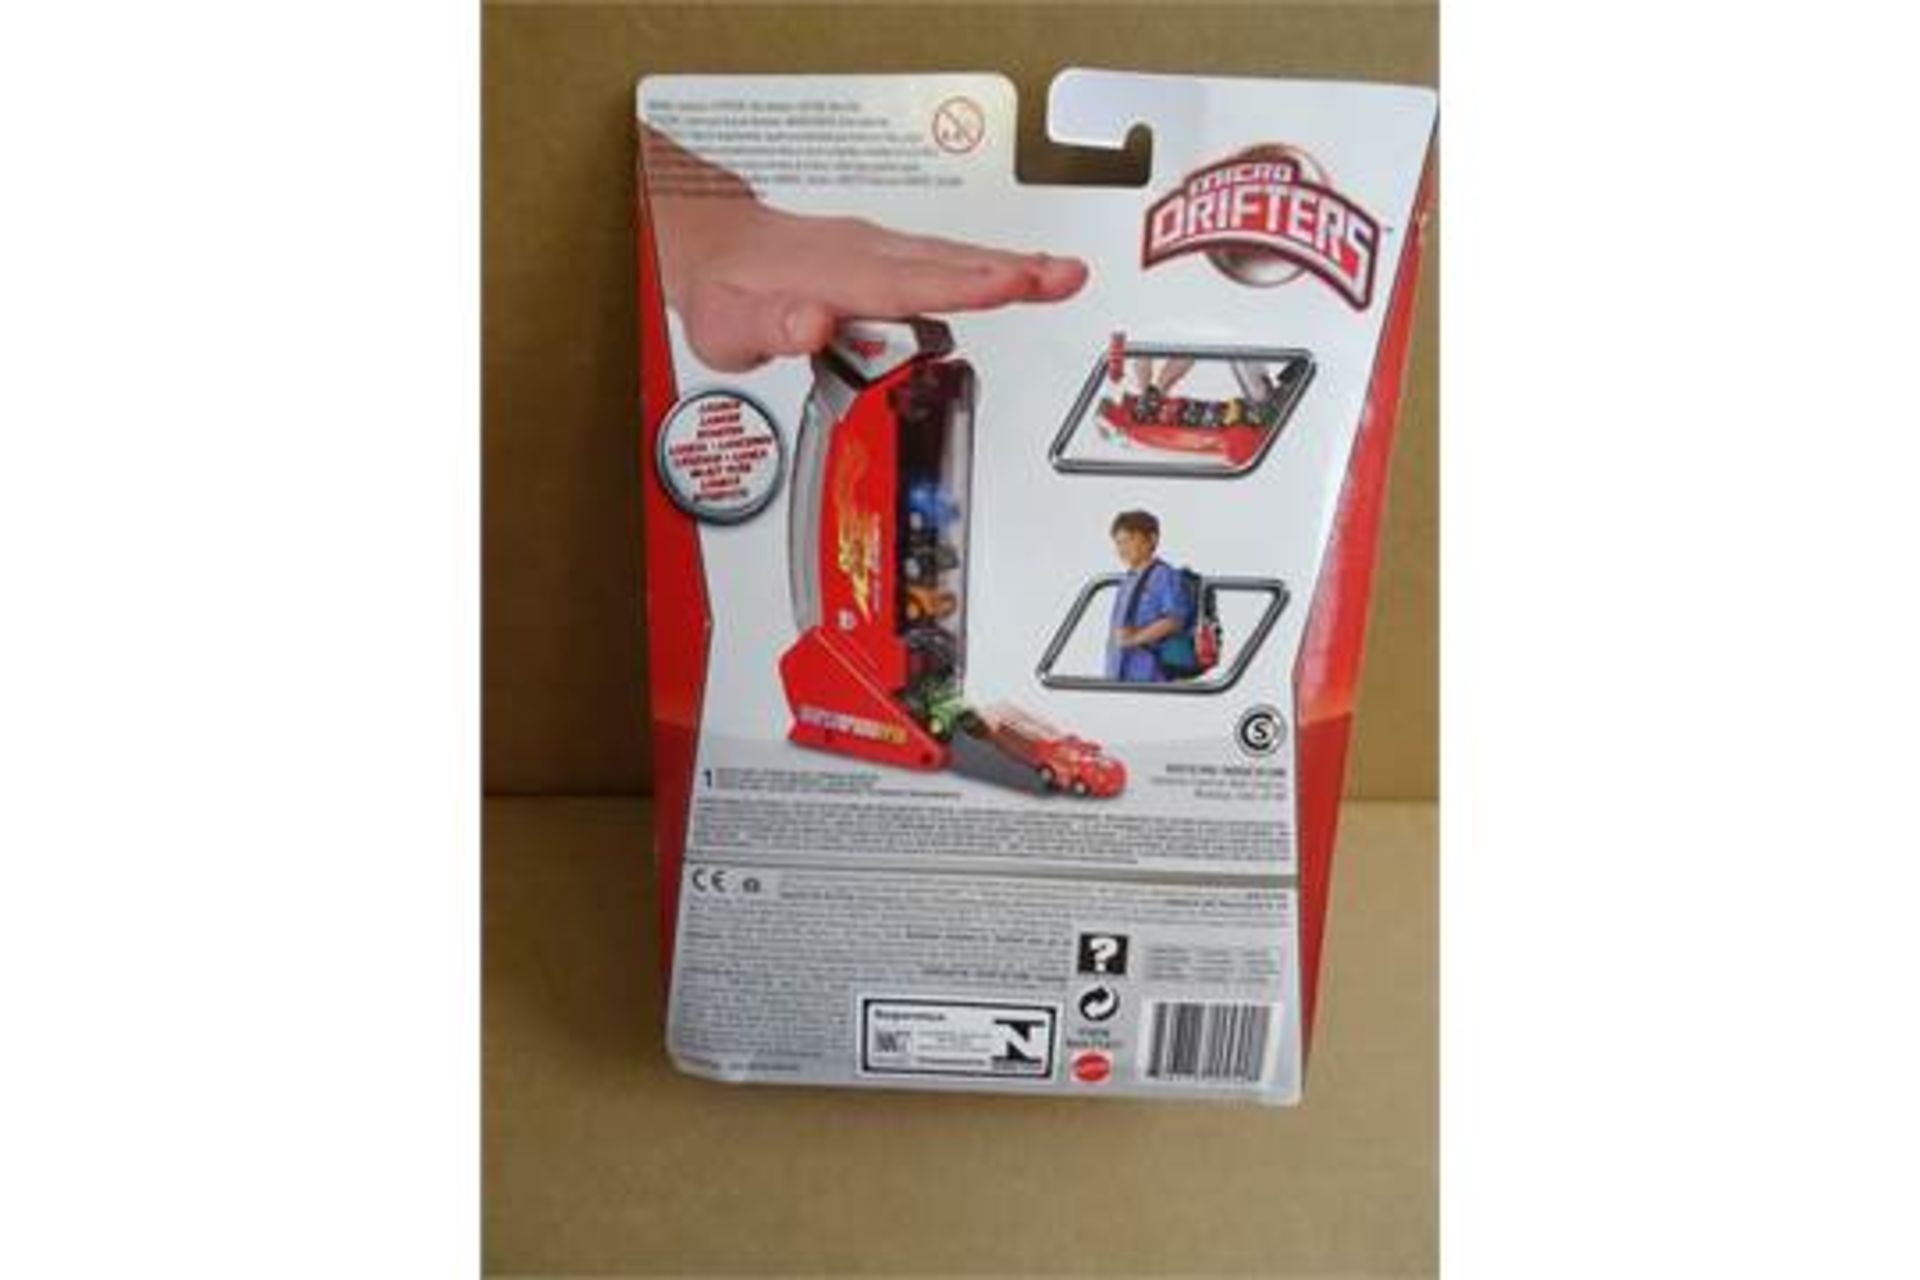 12 x Disney Pixar Cars Mattel Micro Drifters Launcer. Includes 1 car. Brand new and Packaged - Image 2 of 2